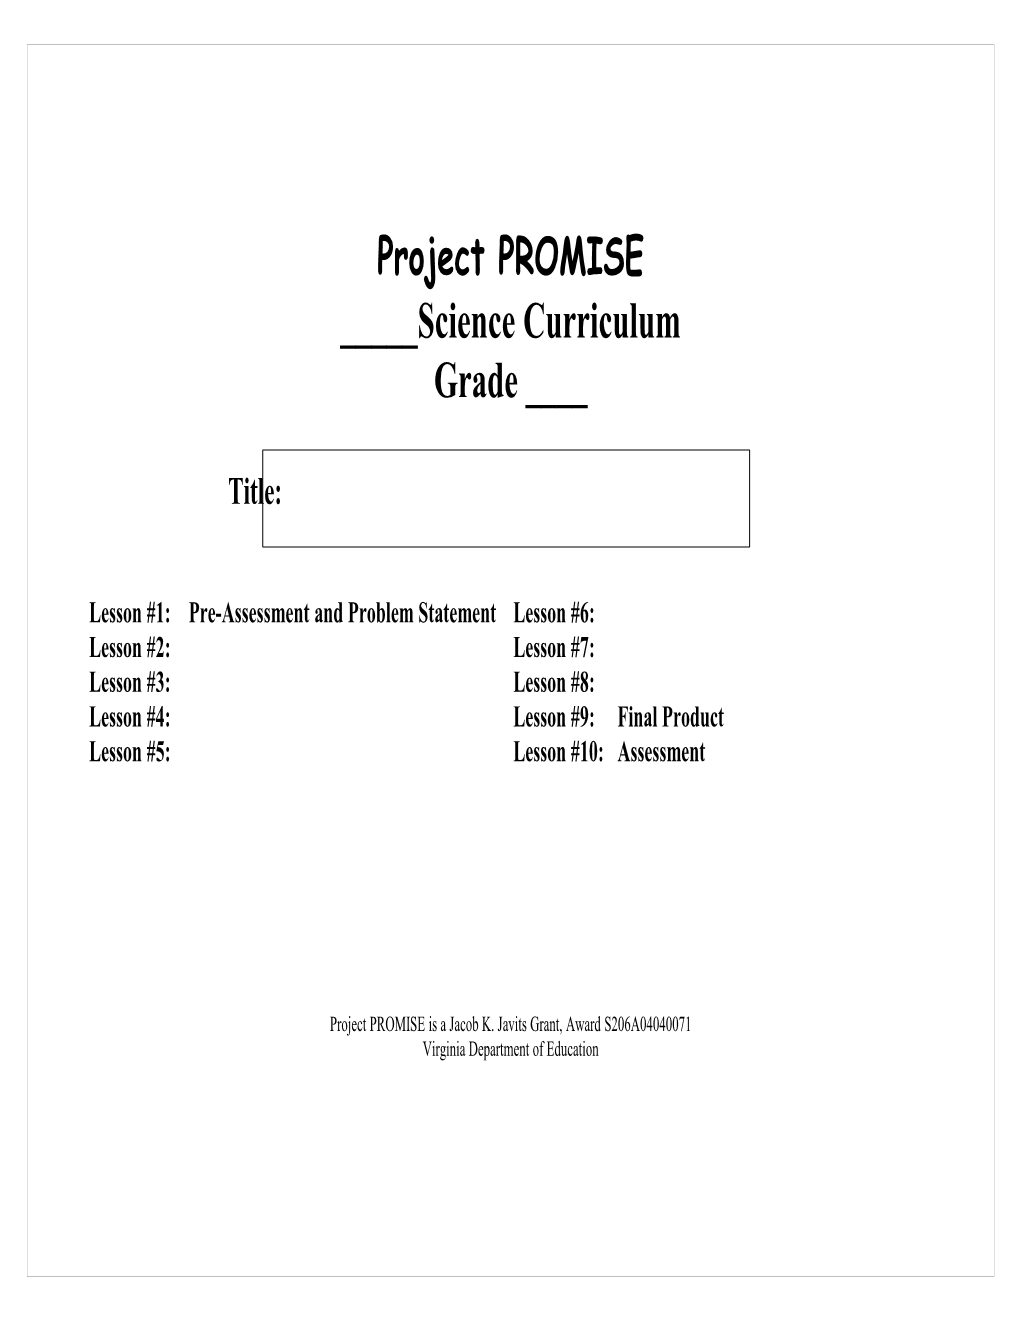 Project PROMISE